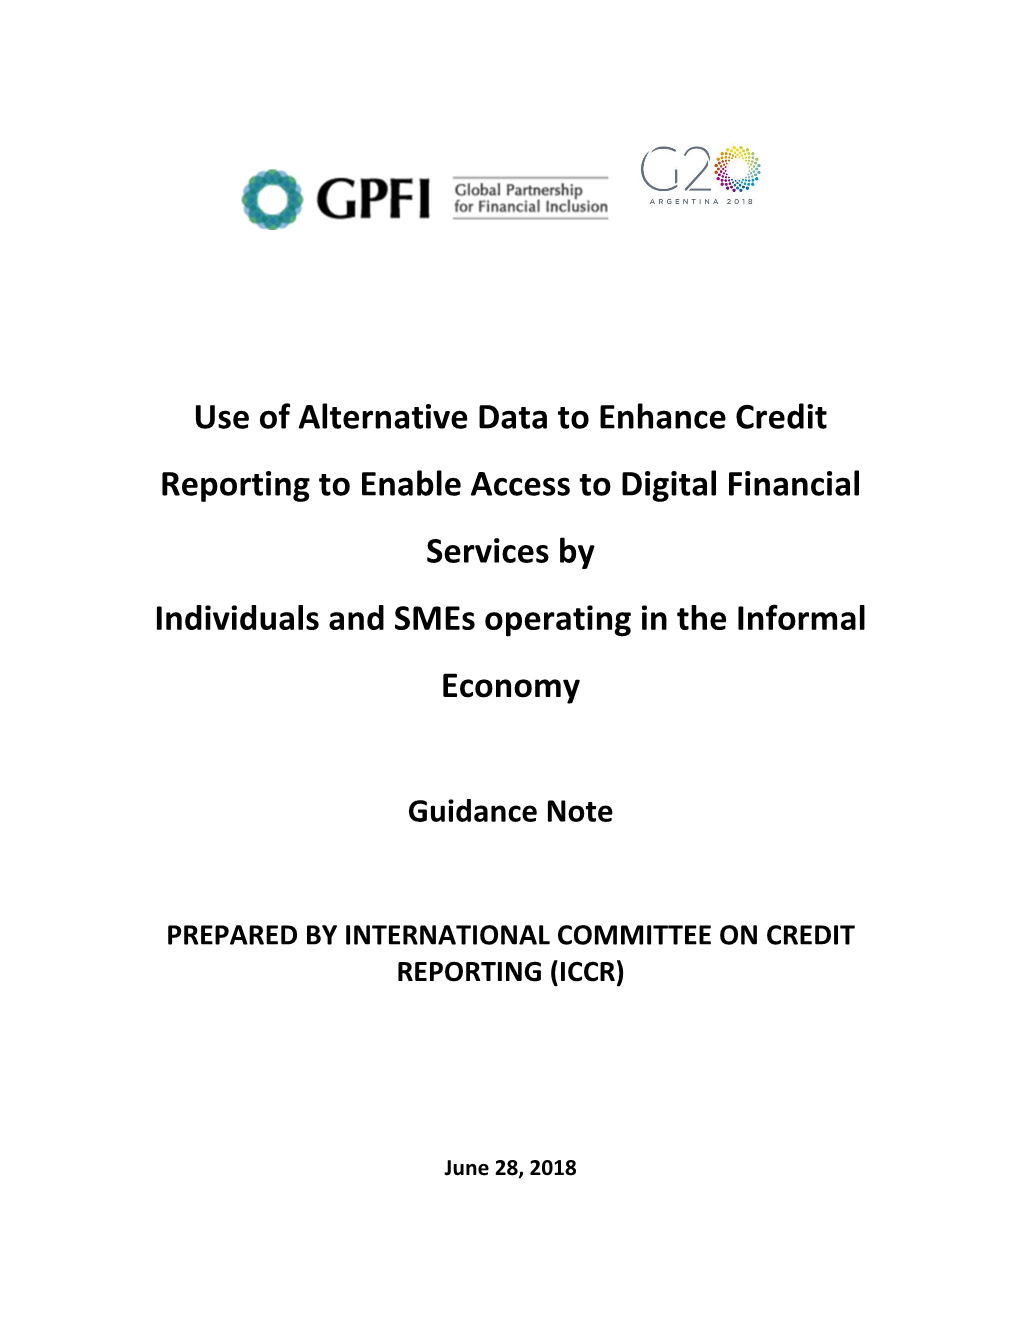 Use of Alternative Data to Enhance Credit Reporting to Enable Access to Digital Financial Services by Individuals and Smes Operating in the Informal Economy